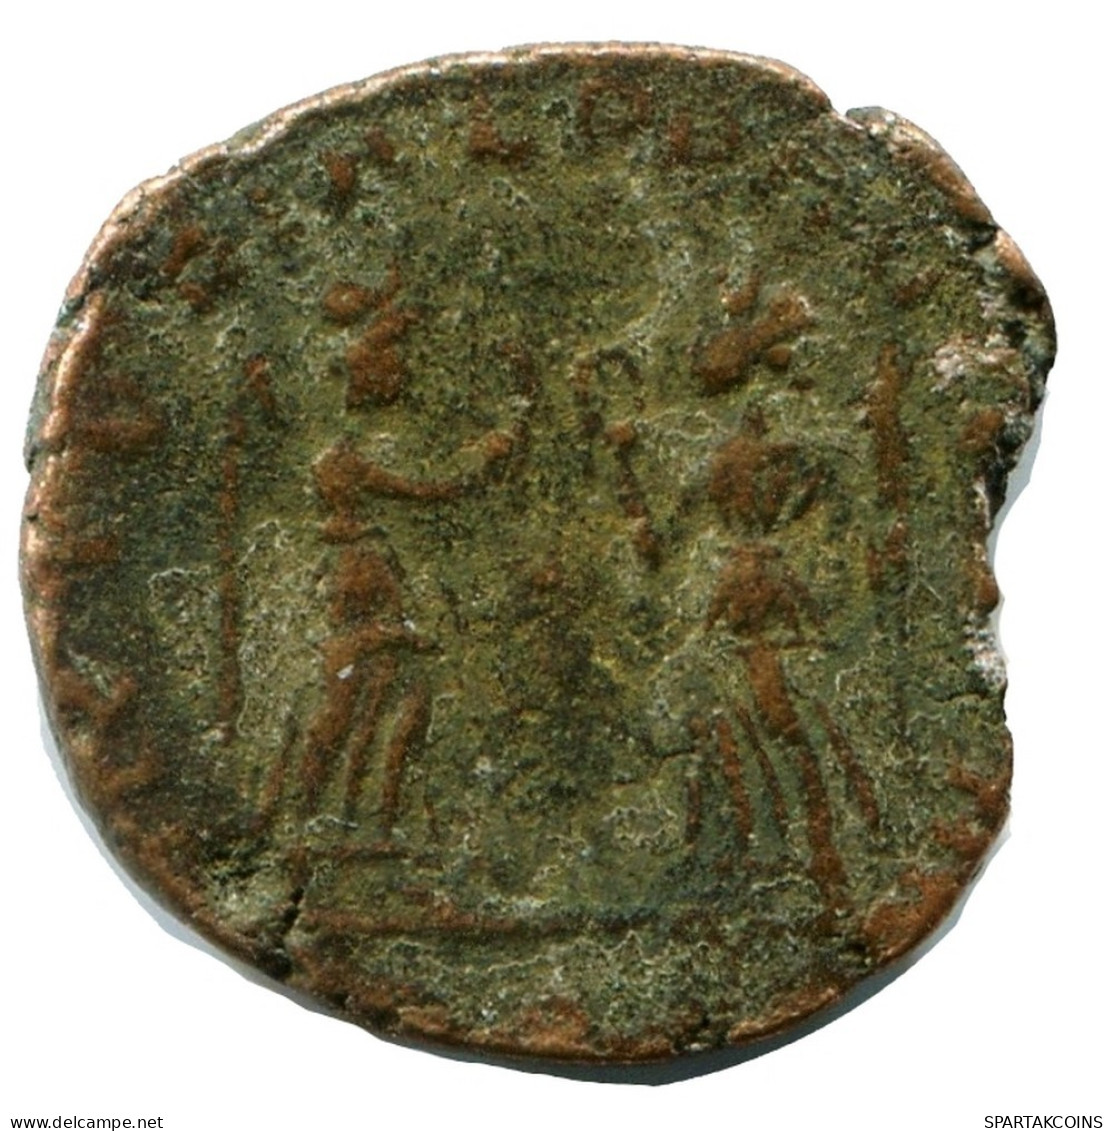 CONSTANS MINTED IN ROME ITALY FOUND IN IHNASYAH HOARD EGYPT #ANC11527.14.F.A - El Impero Christiano (307 / 363)